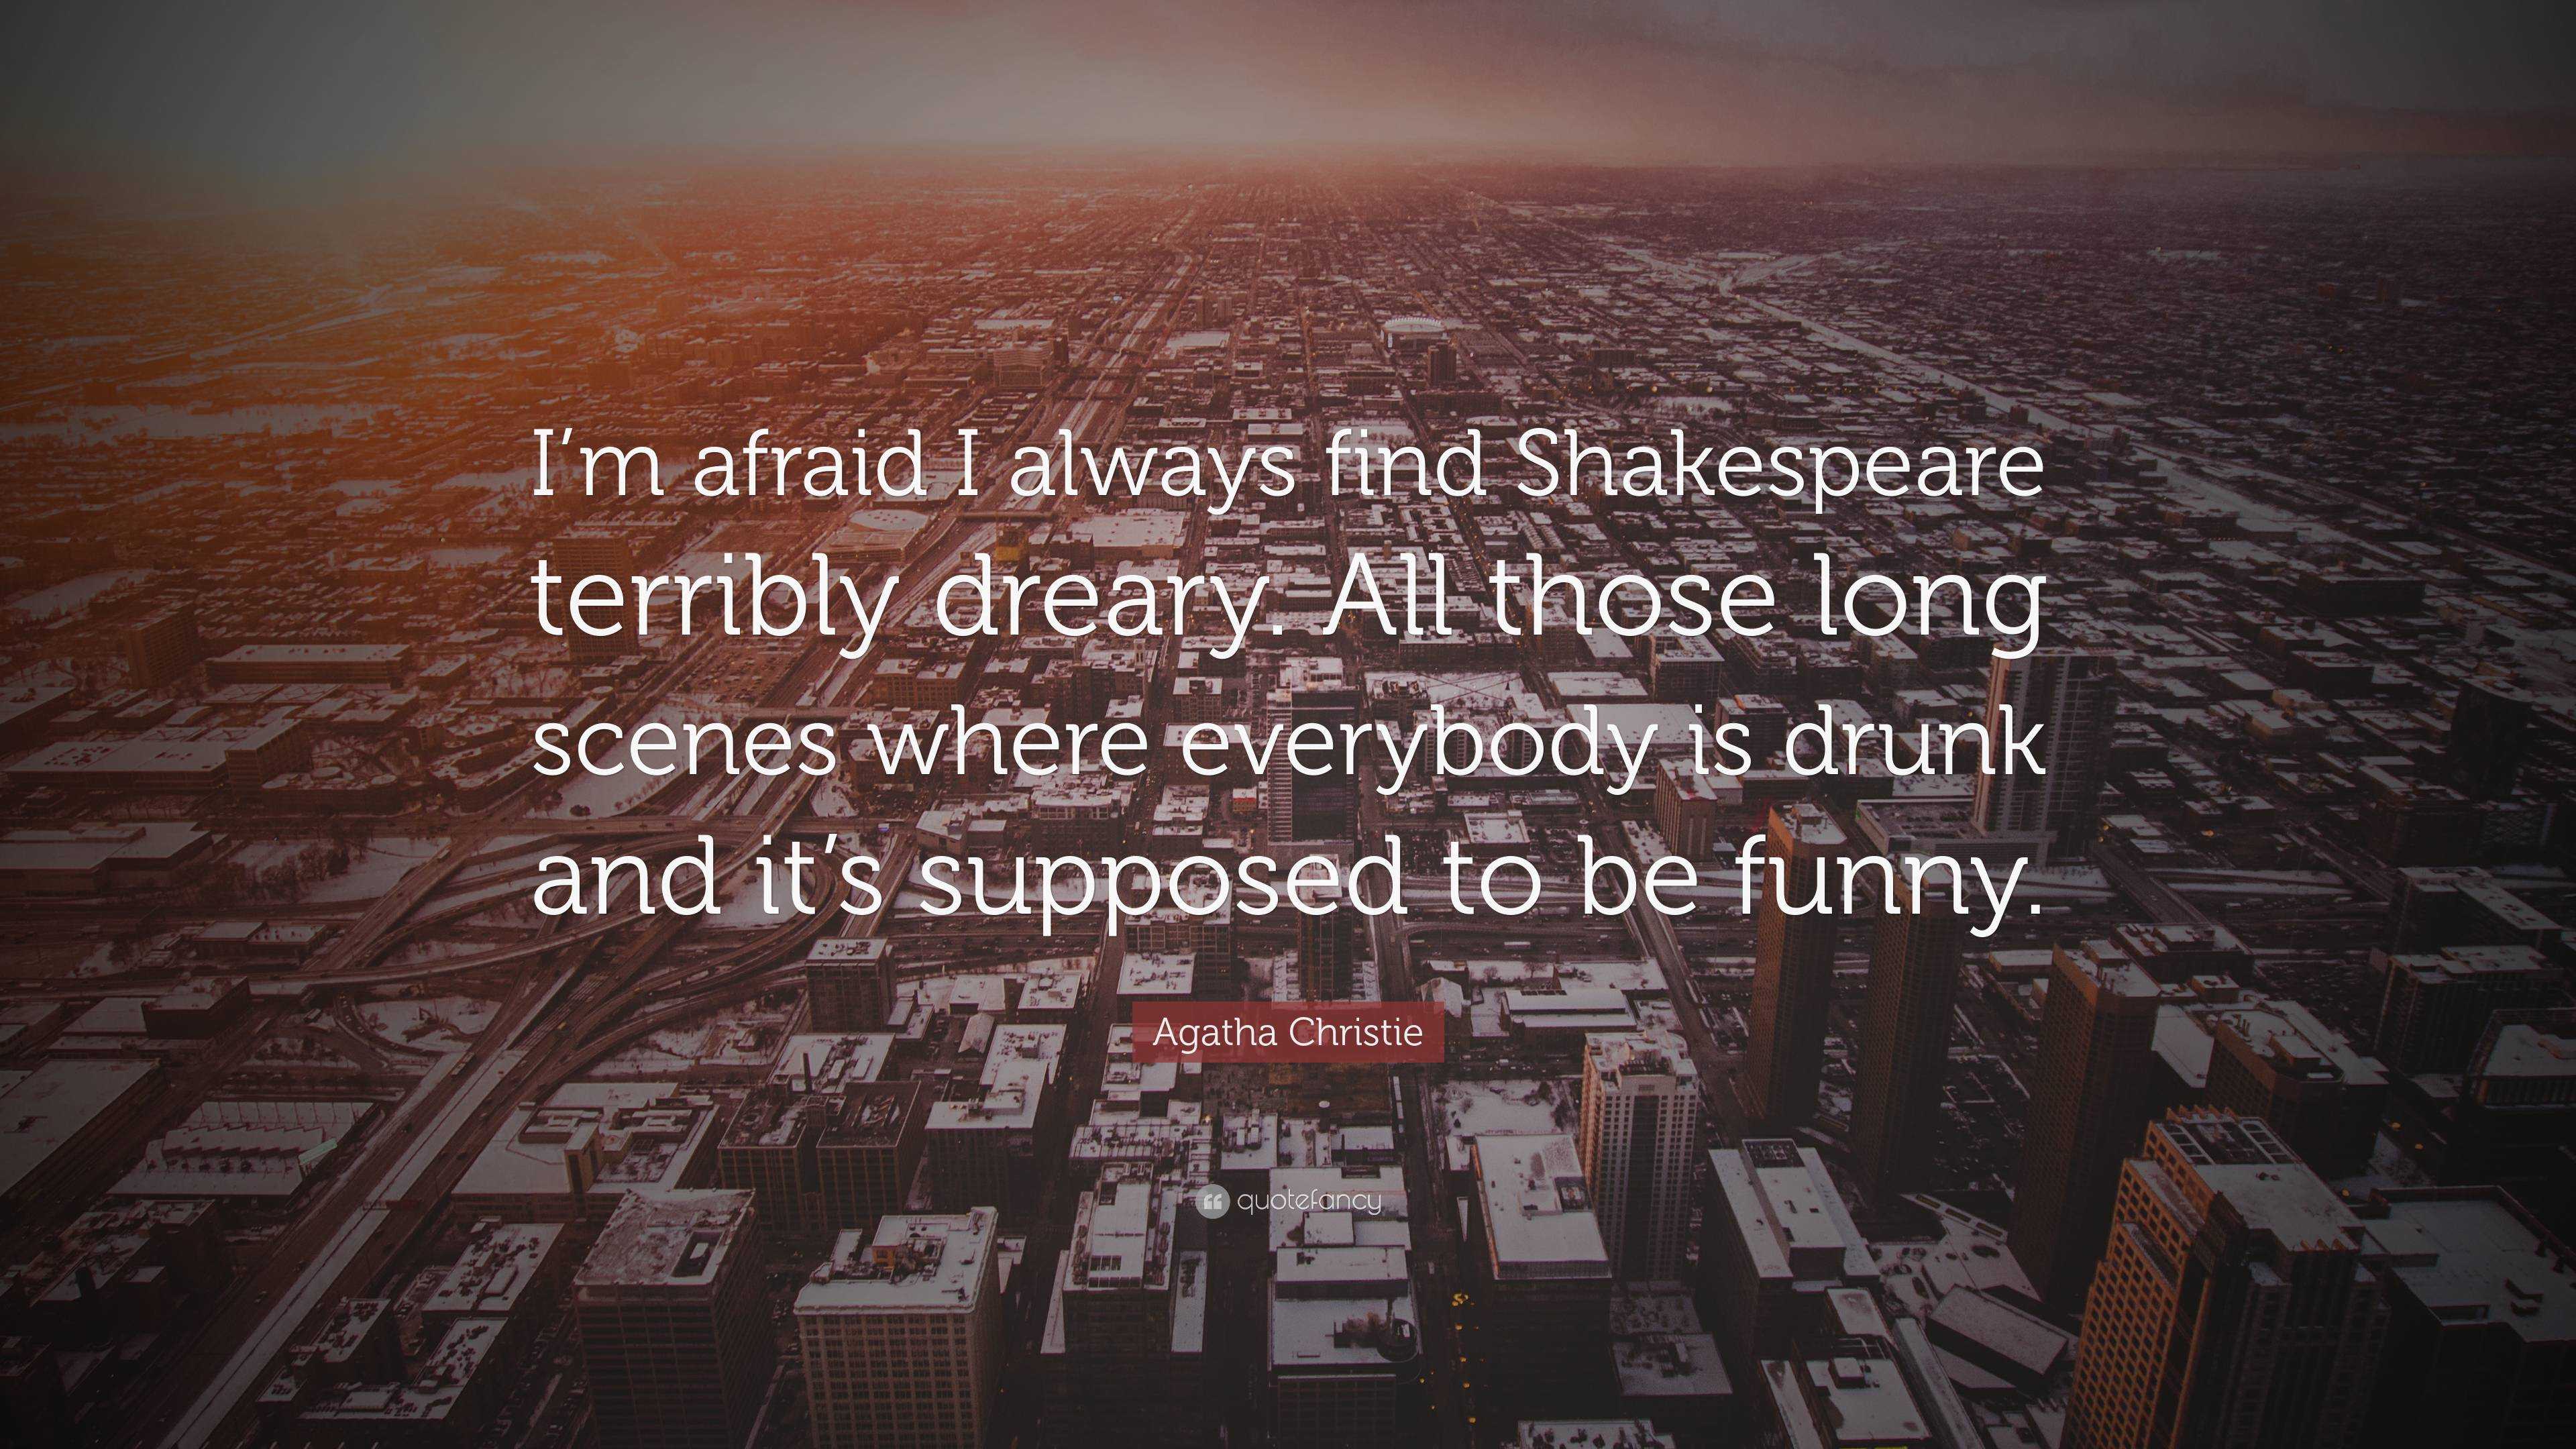 Agatha Christie Quote: “I'm afraid I always find Shakespeare terribly  dreary. All those long scenes where everybody is drunk and it's supposed  t...”